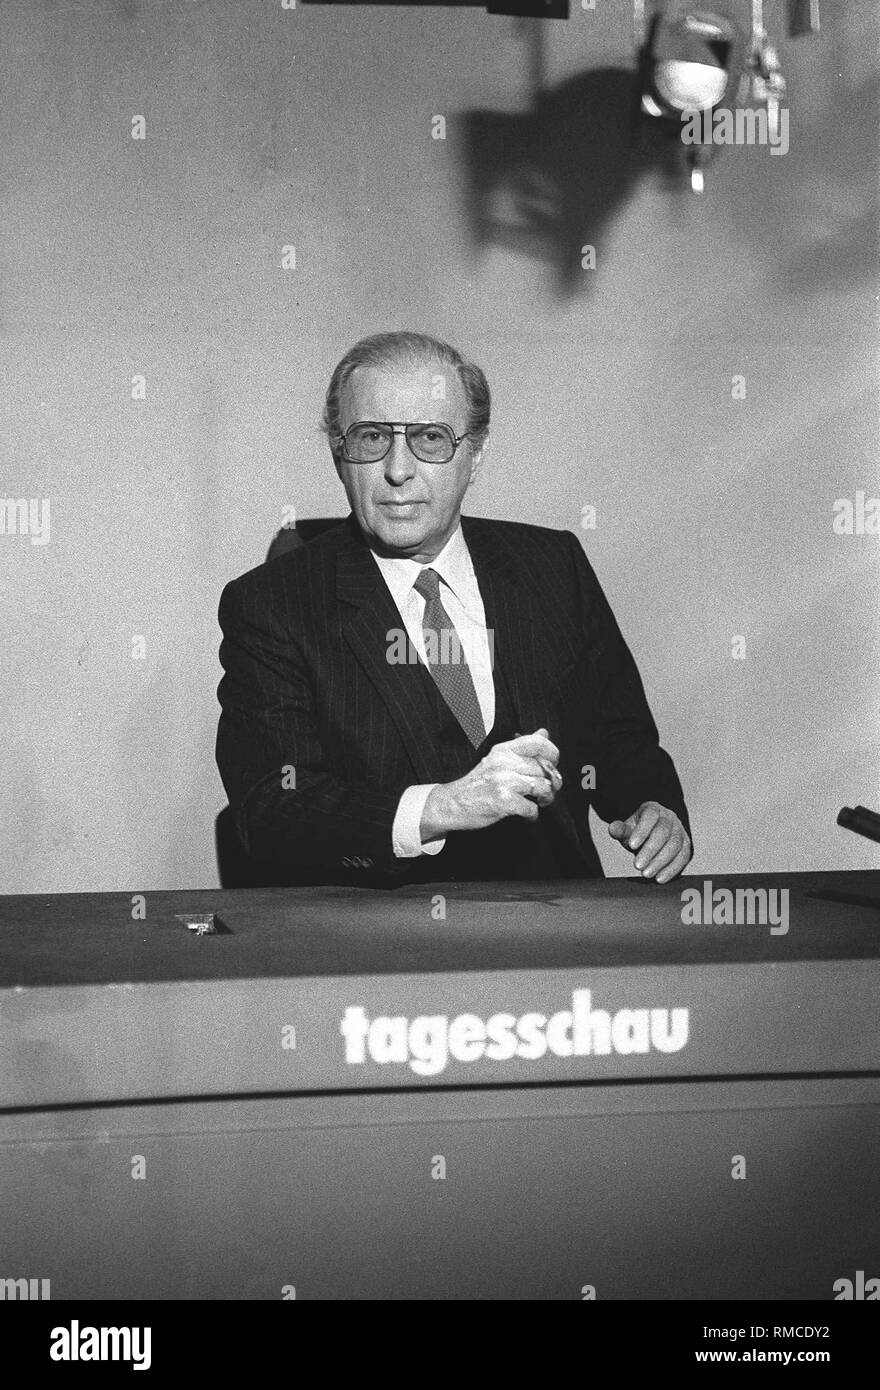 On December 25, 1952, the German television launched its triumphal march. 50 years of information and entertainment. Popular presenters and artists have become stars, even icons of electronic entertainment: Karl-Heinz Koepcke, Tagesschau veteran. Our photo shows him in 1983 in the Tagesschau studio. Stock Photo